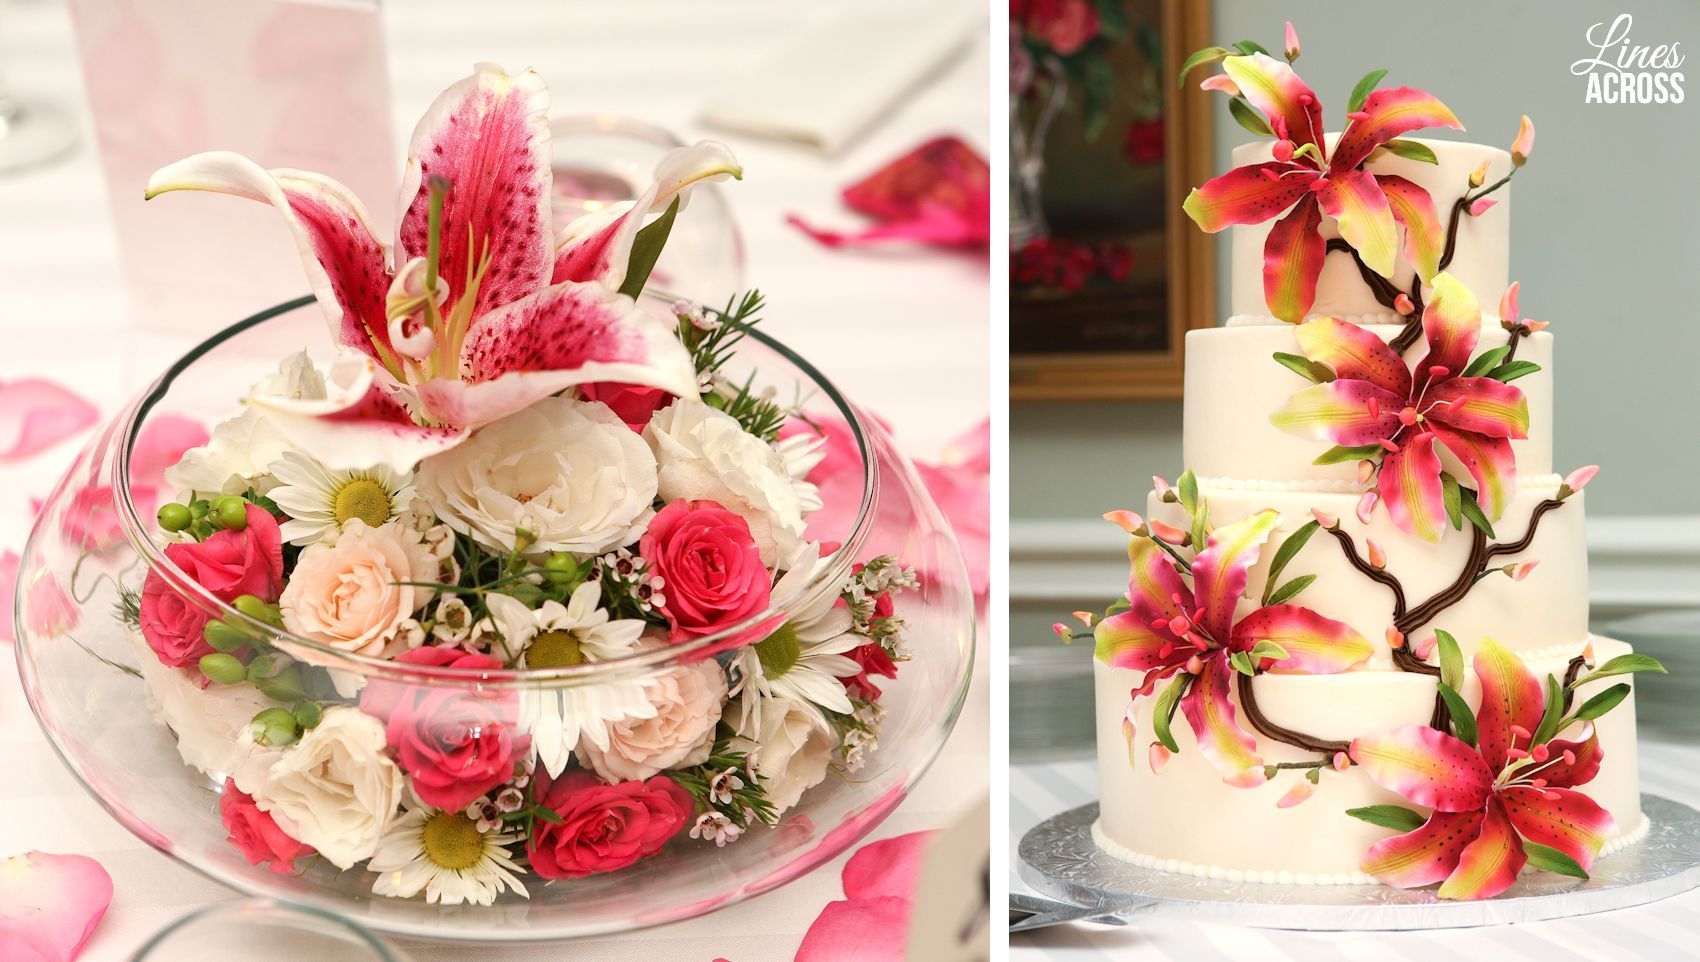 Lily Wedding Cake and Centerpiece @linesacross